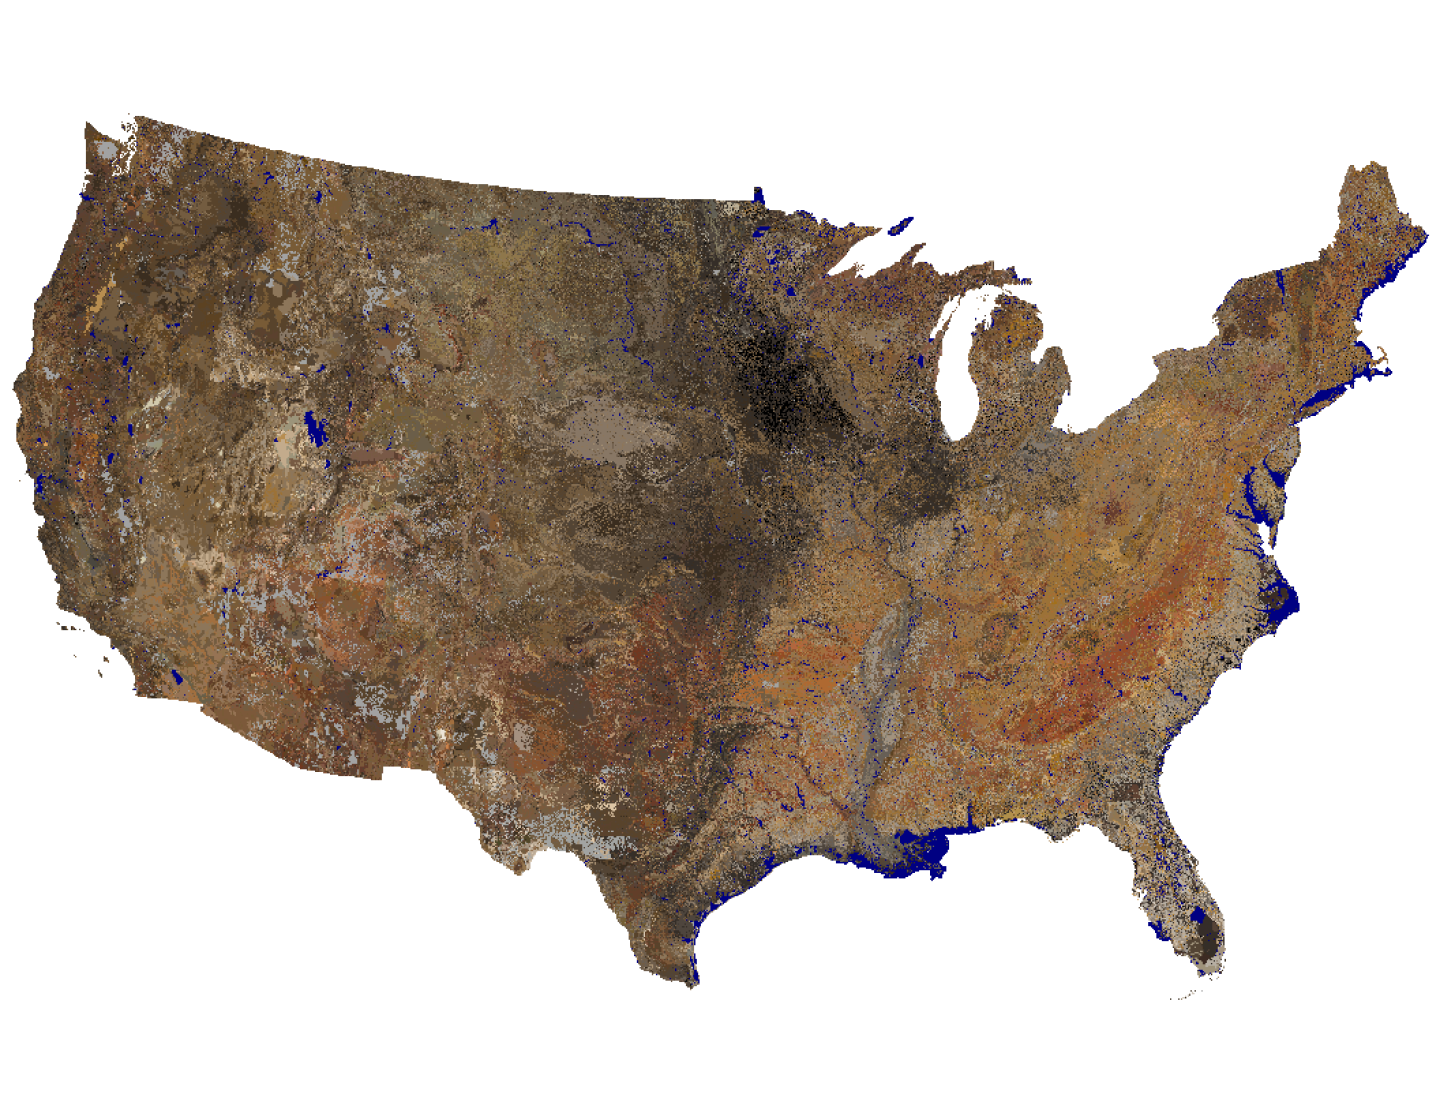 Map of the contiguous United States showing soil colors at 25cm depth.